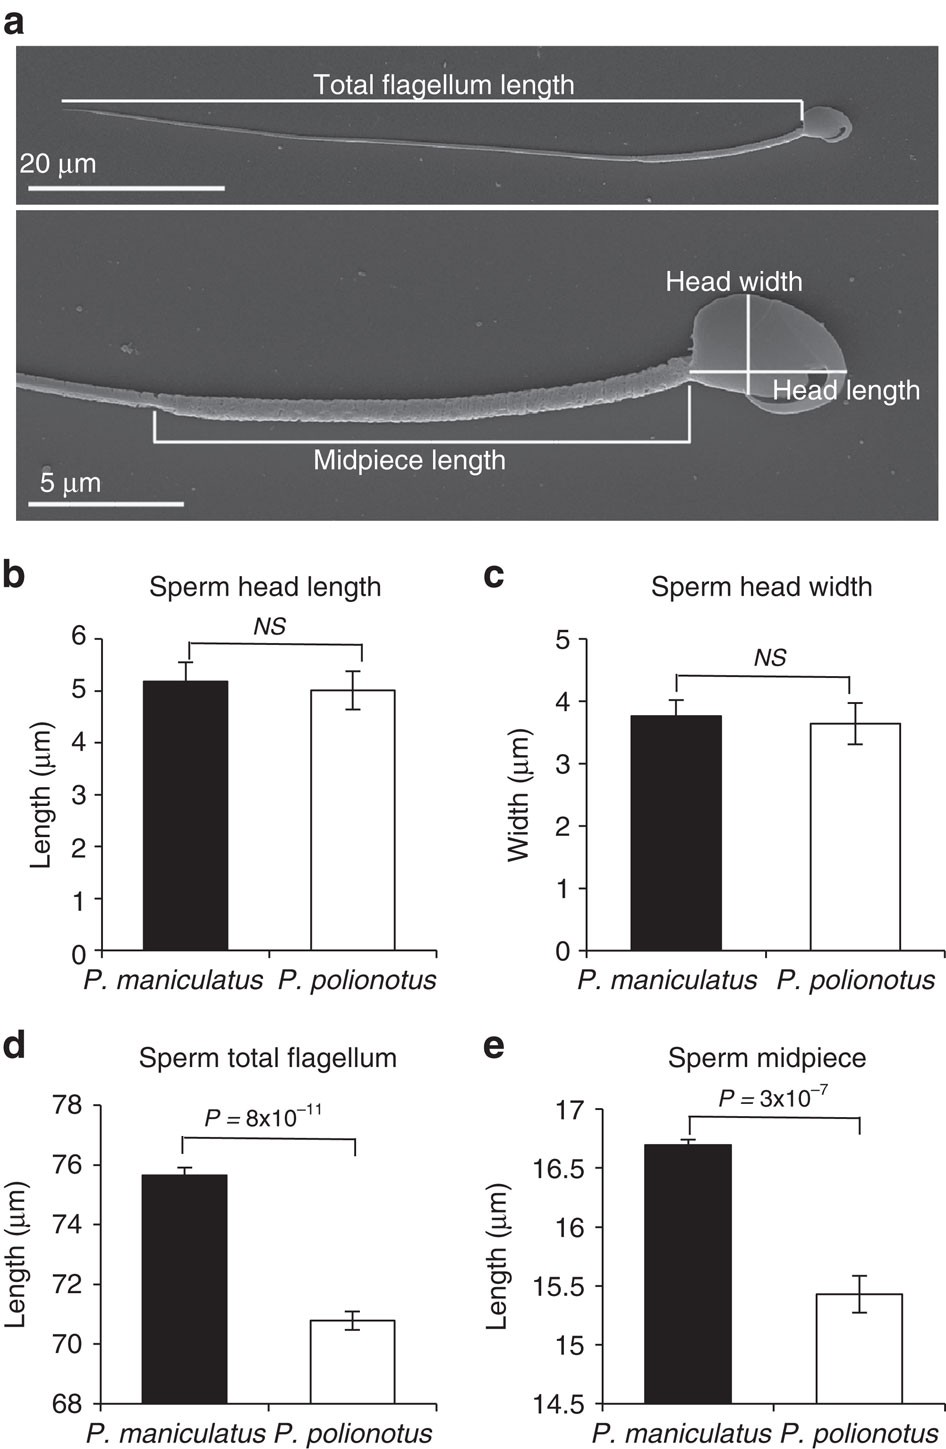 The genetic basis and fitness consequences of sperm midpiece size in deer  mice | Nature Communications